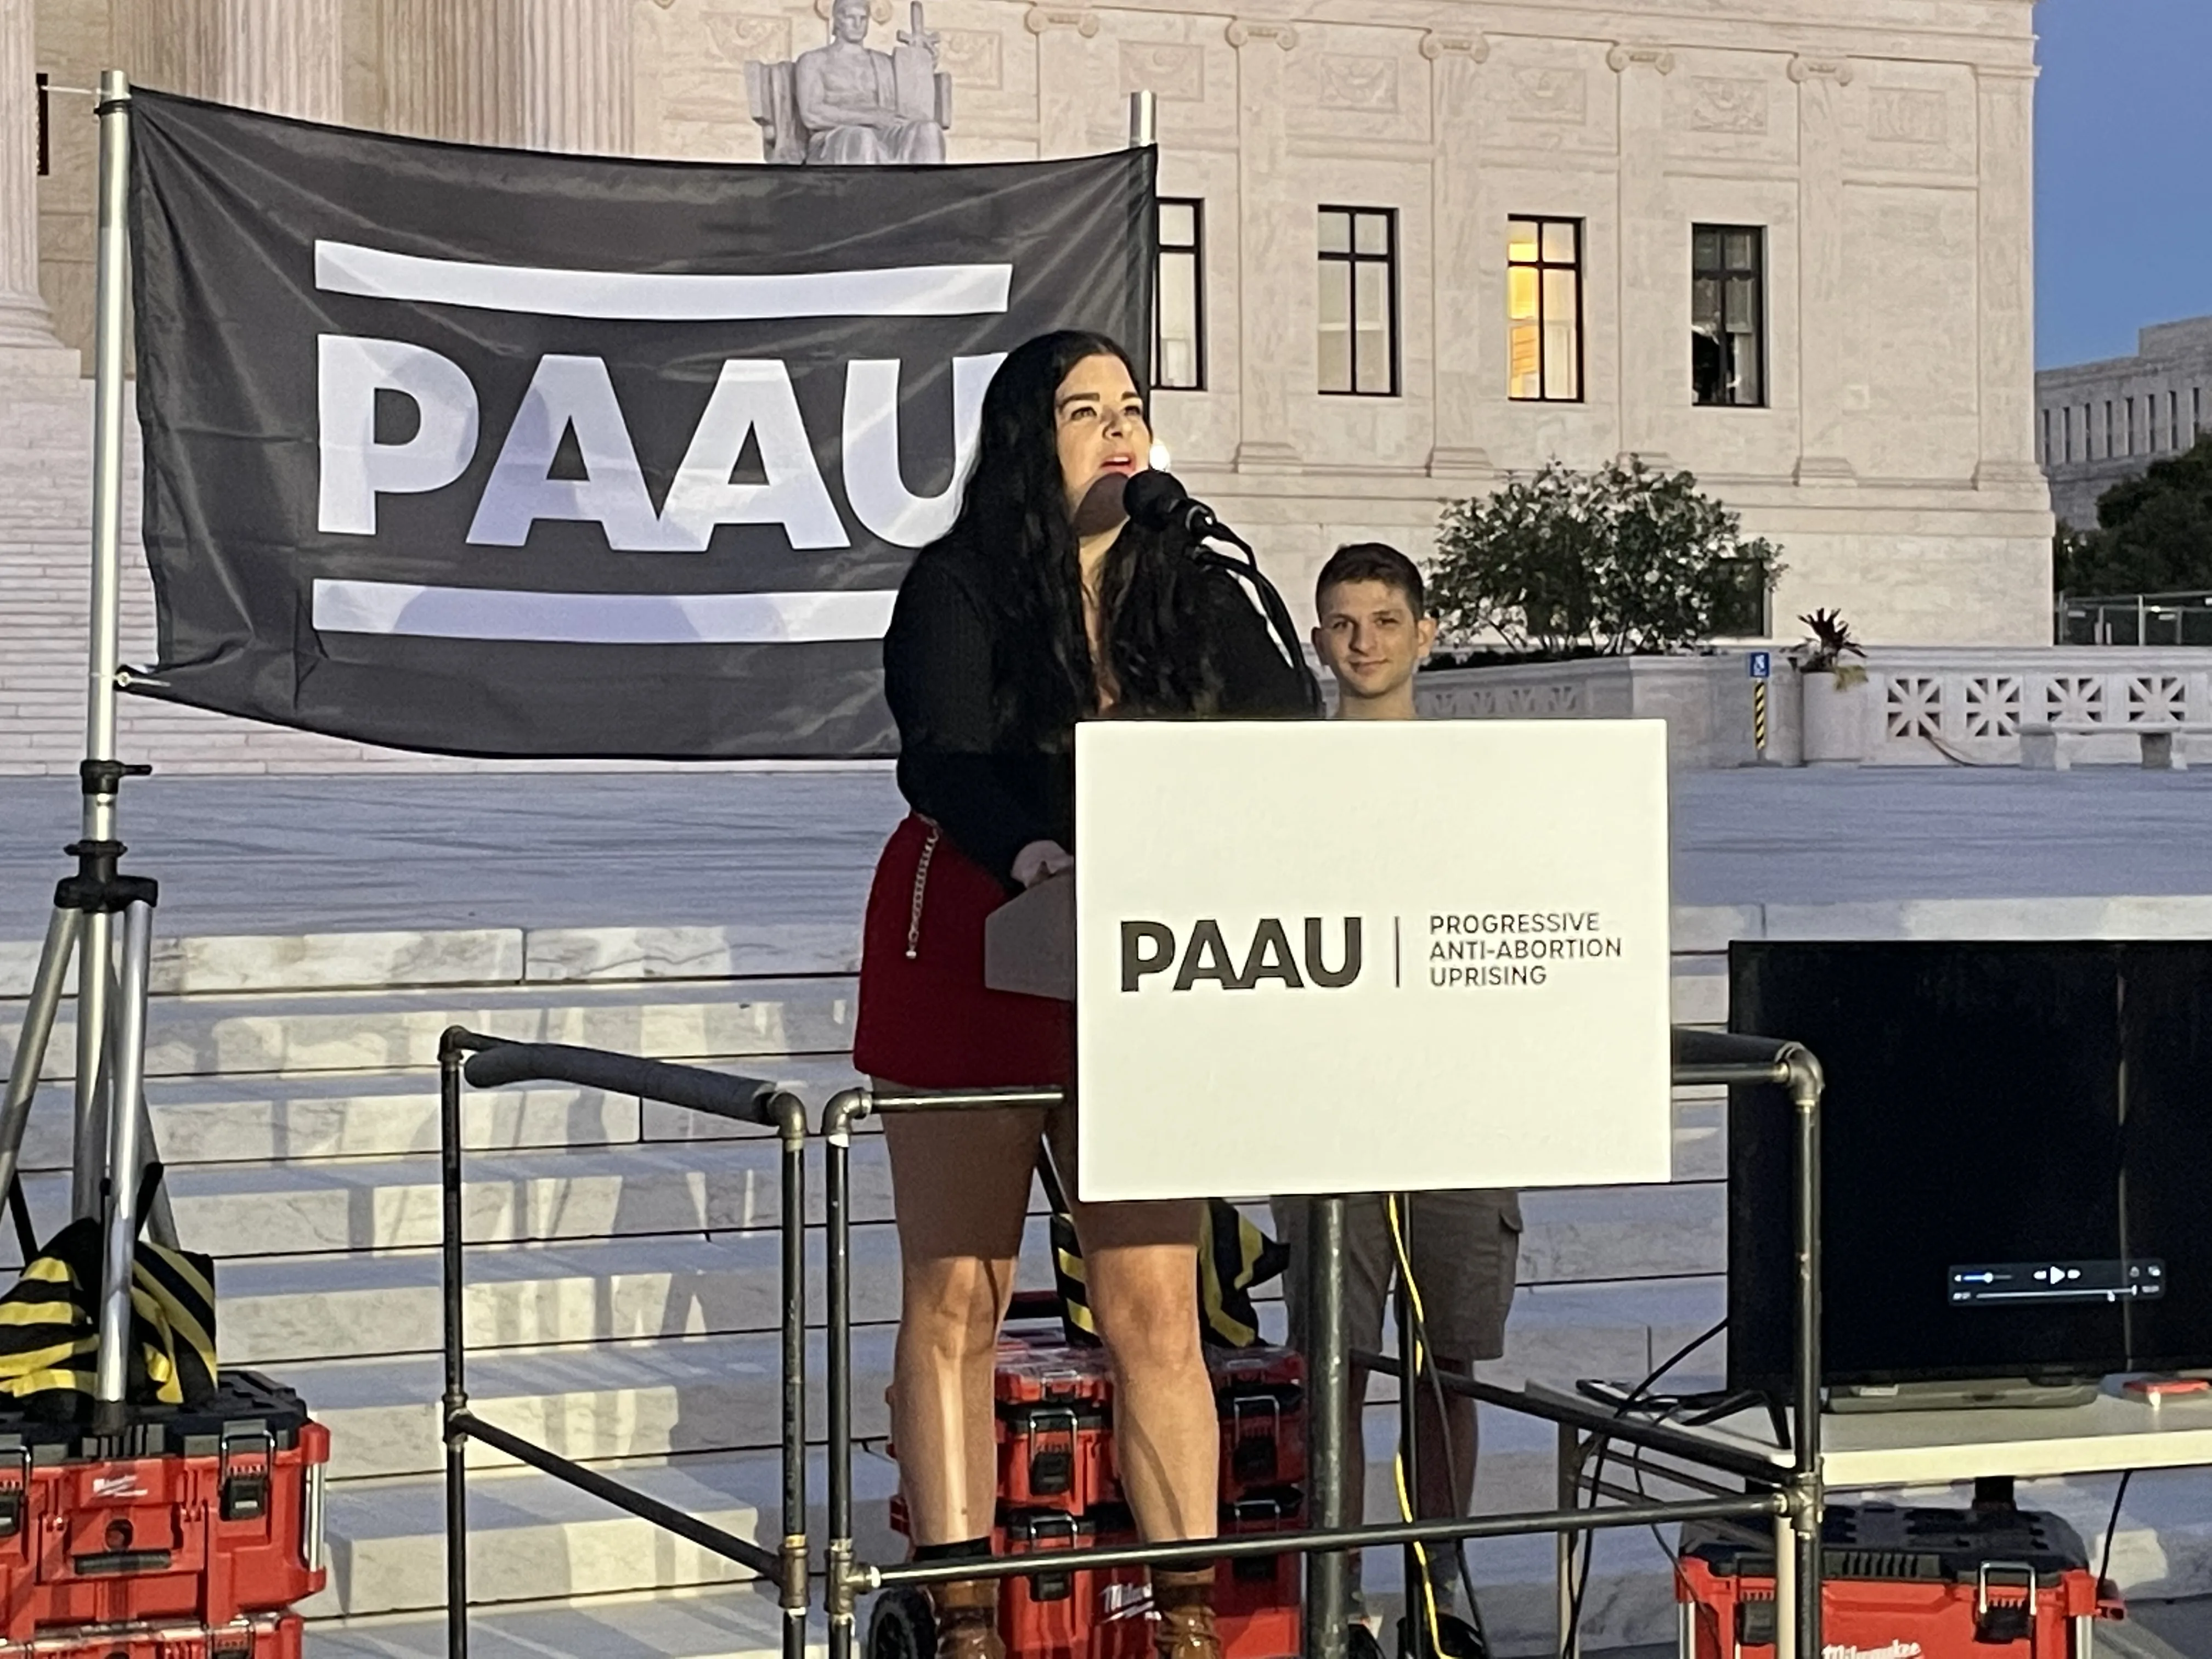 Terrisa Bukovinac speaks at a rally launching the The Progressive Anti-Abortion Uprising in Washington, D.C., Oct. 1, 2021.?w=200&h=150